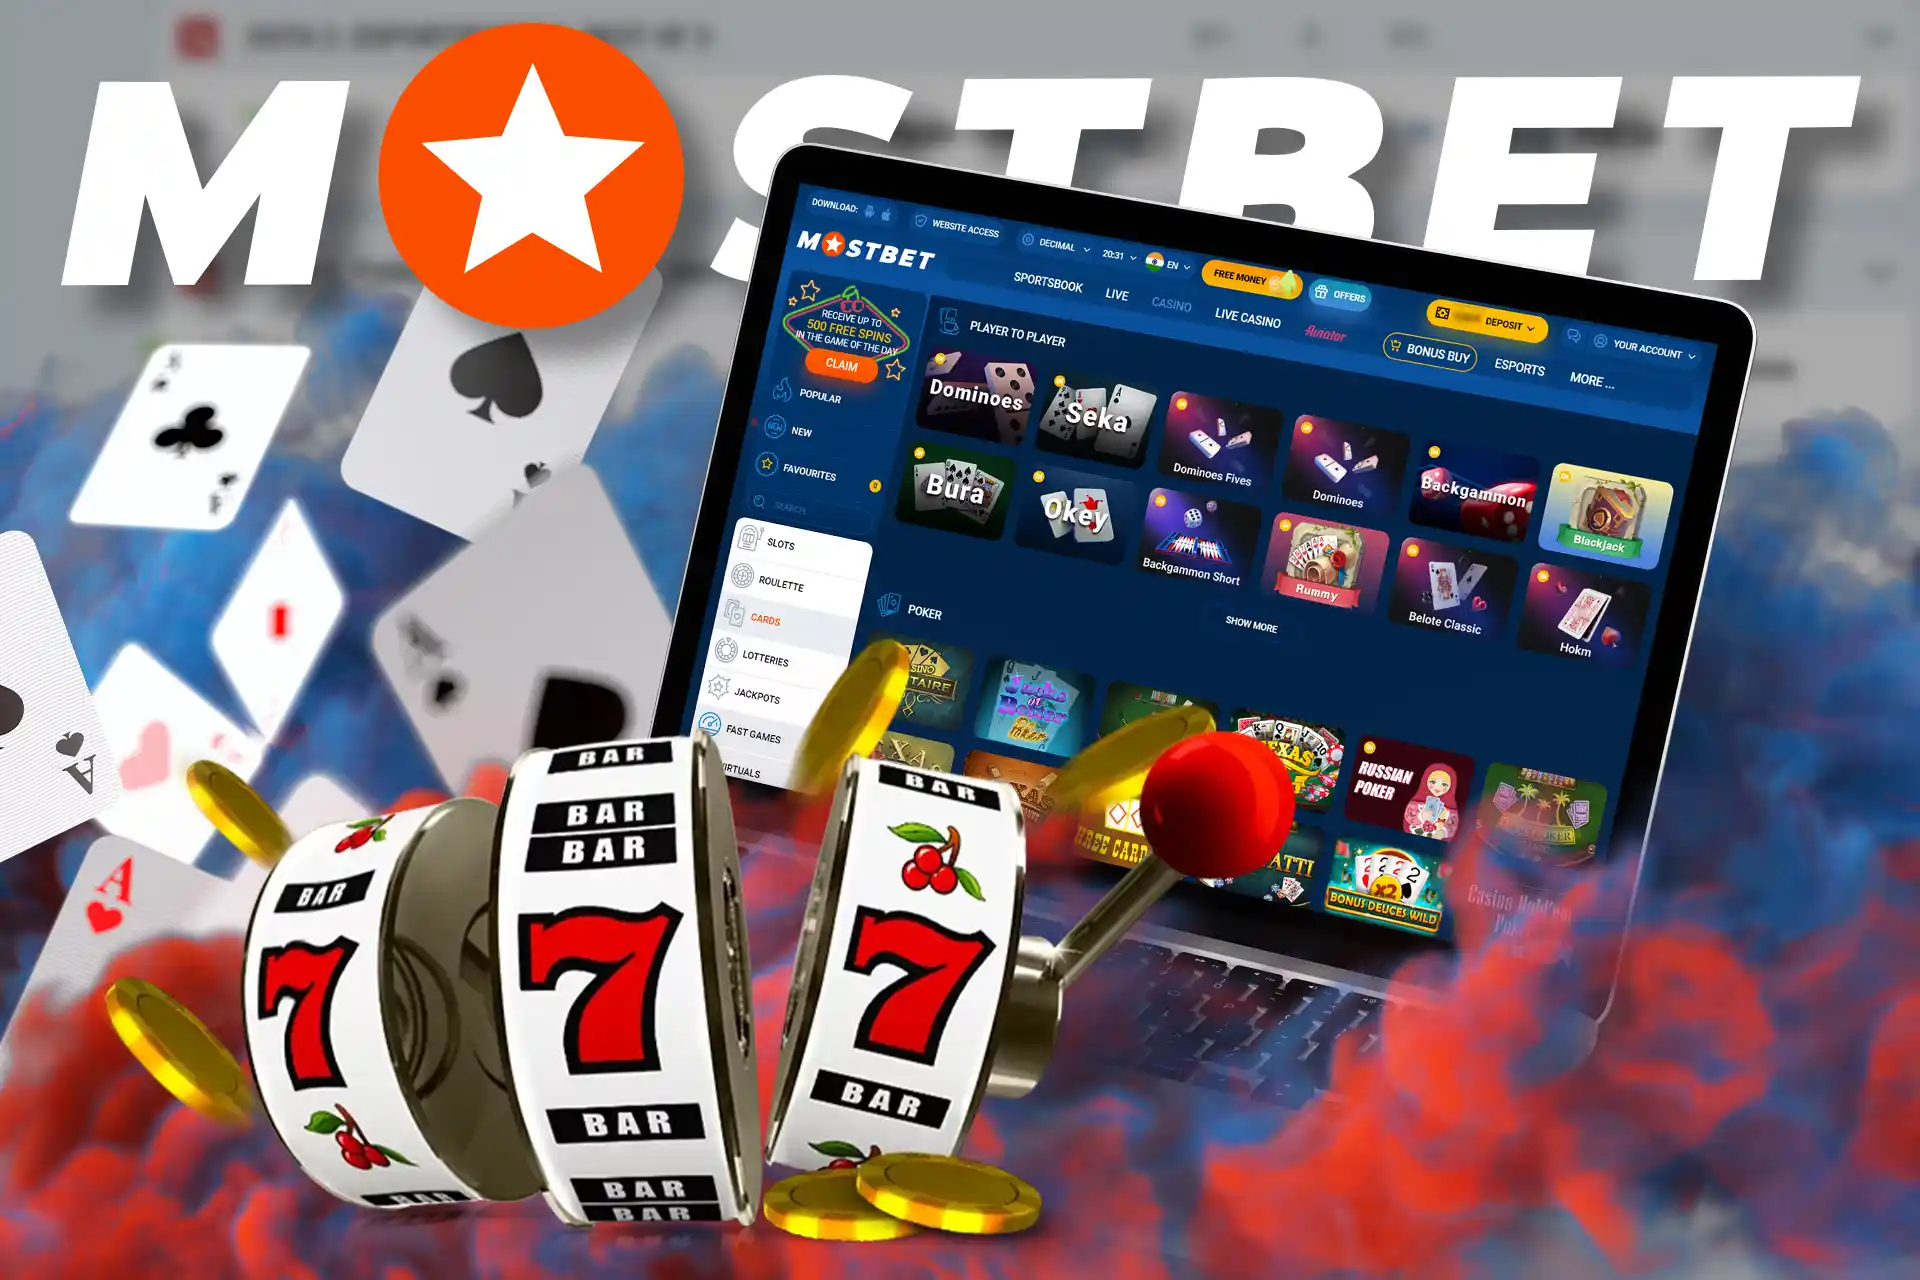 At Mostbet, get special bonuses for profitable casino play.